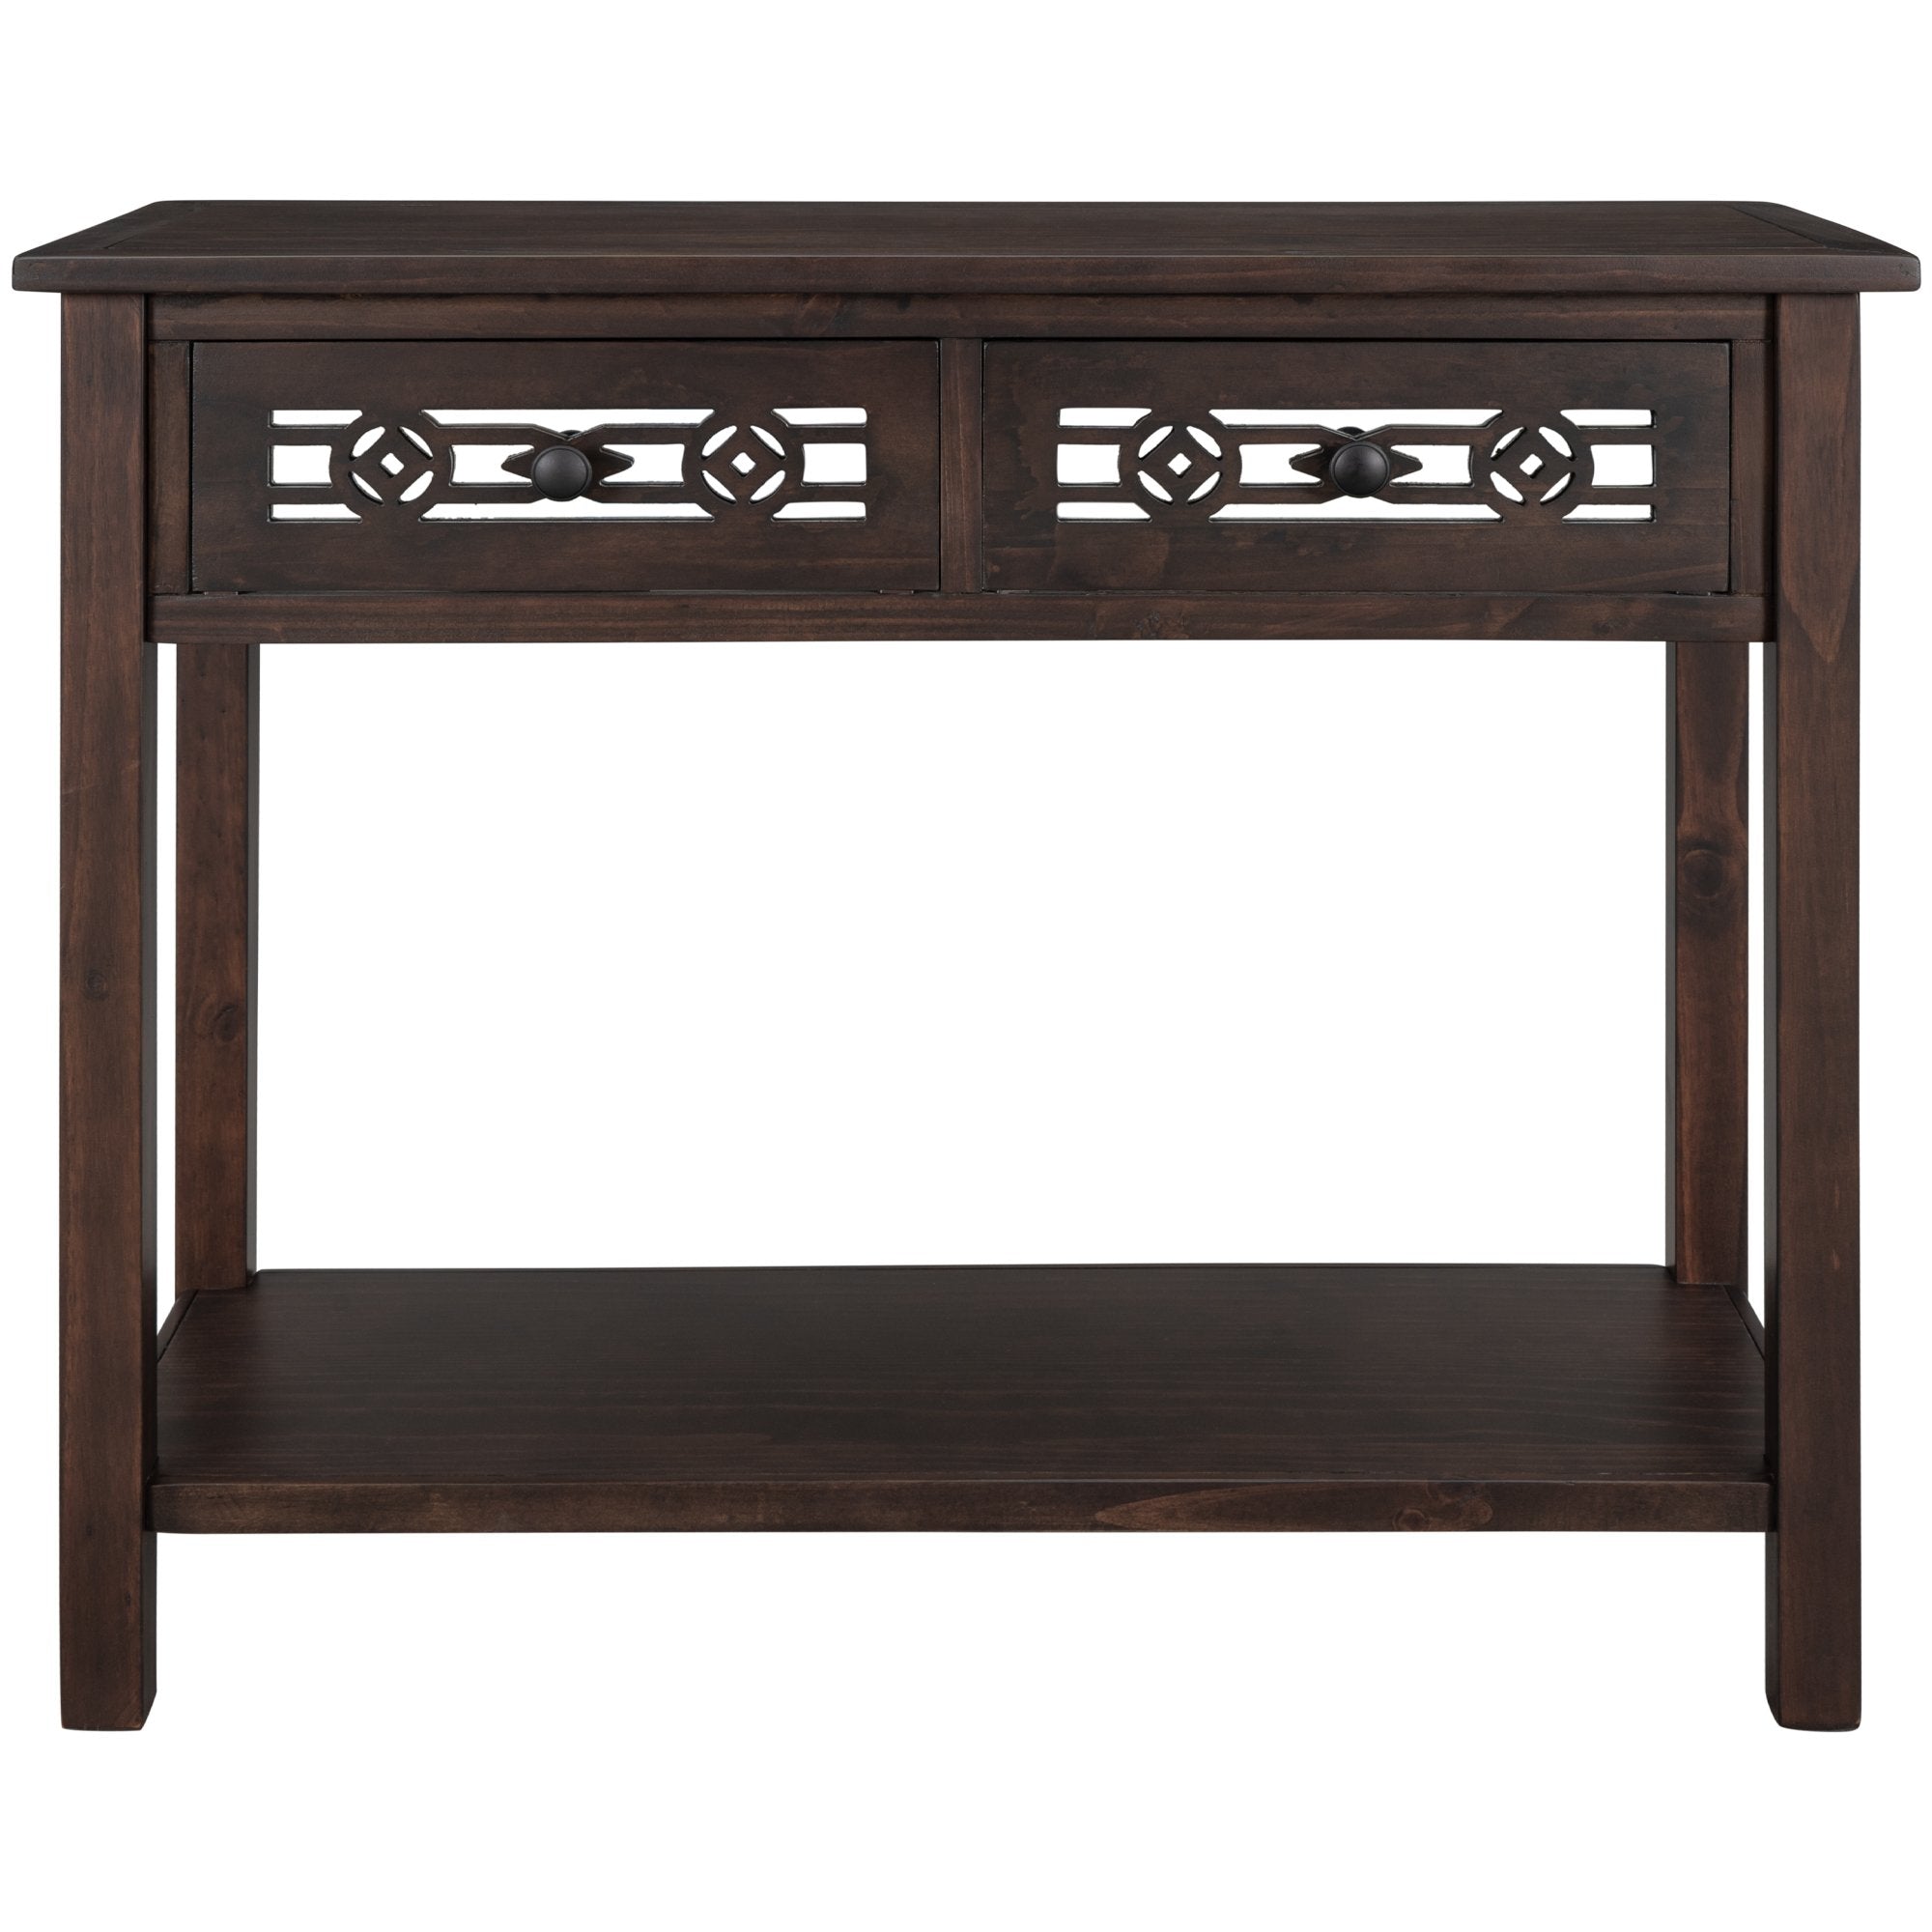 Classic Console Table with Hollow-out Decoration Two Top Drawers and Open Shelf